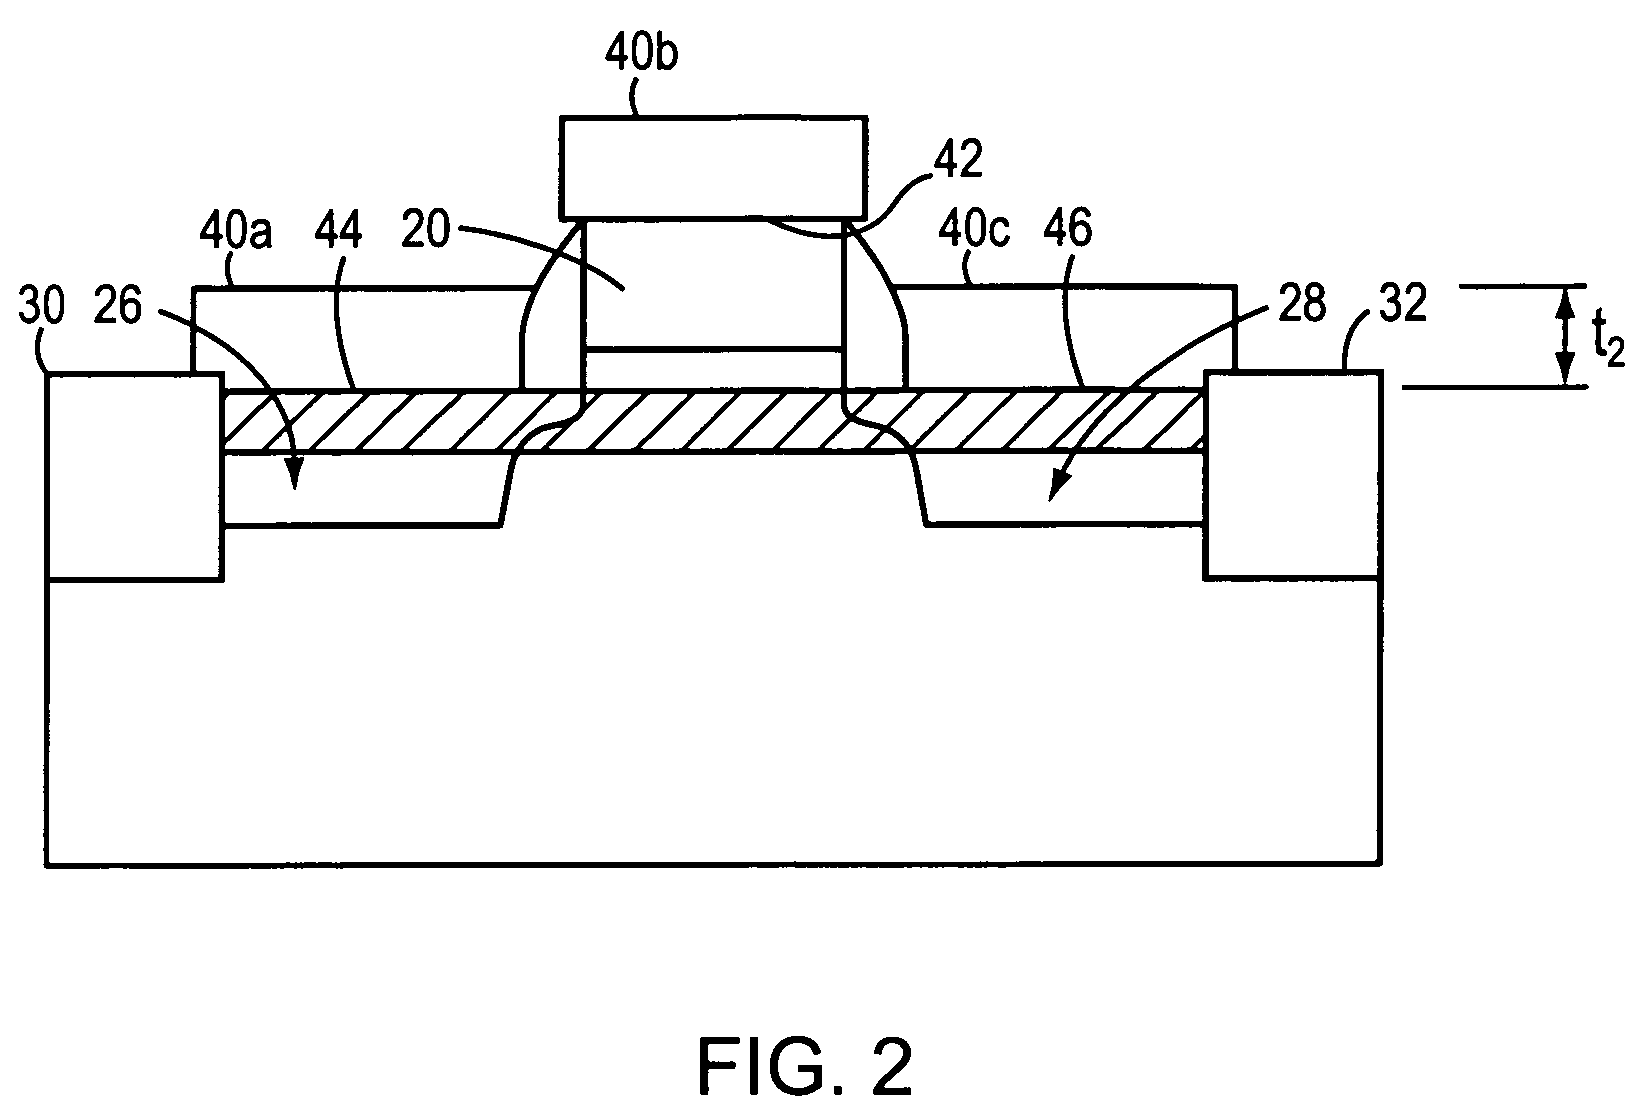 Elevated source and drain elements for strained-channel heterojuntion field-effect transistors